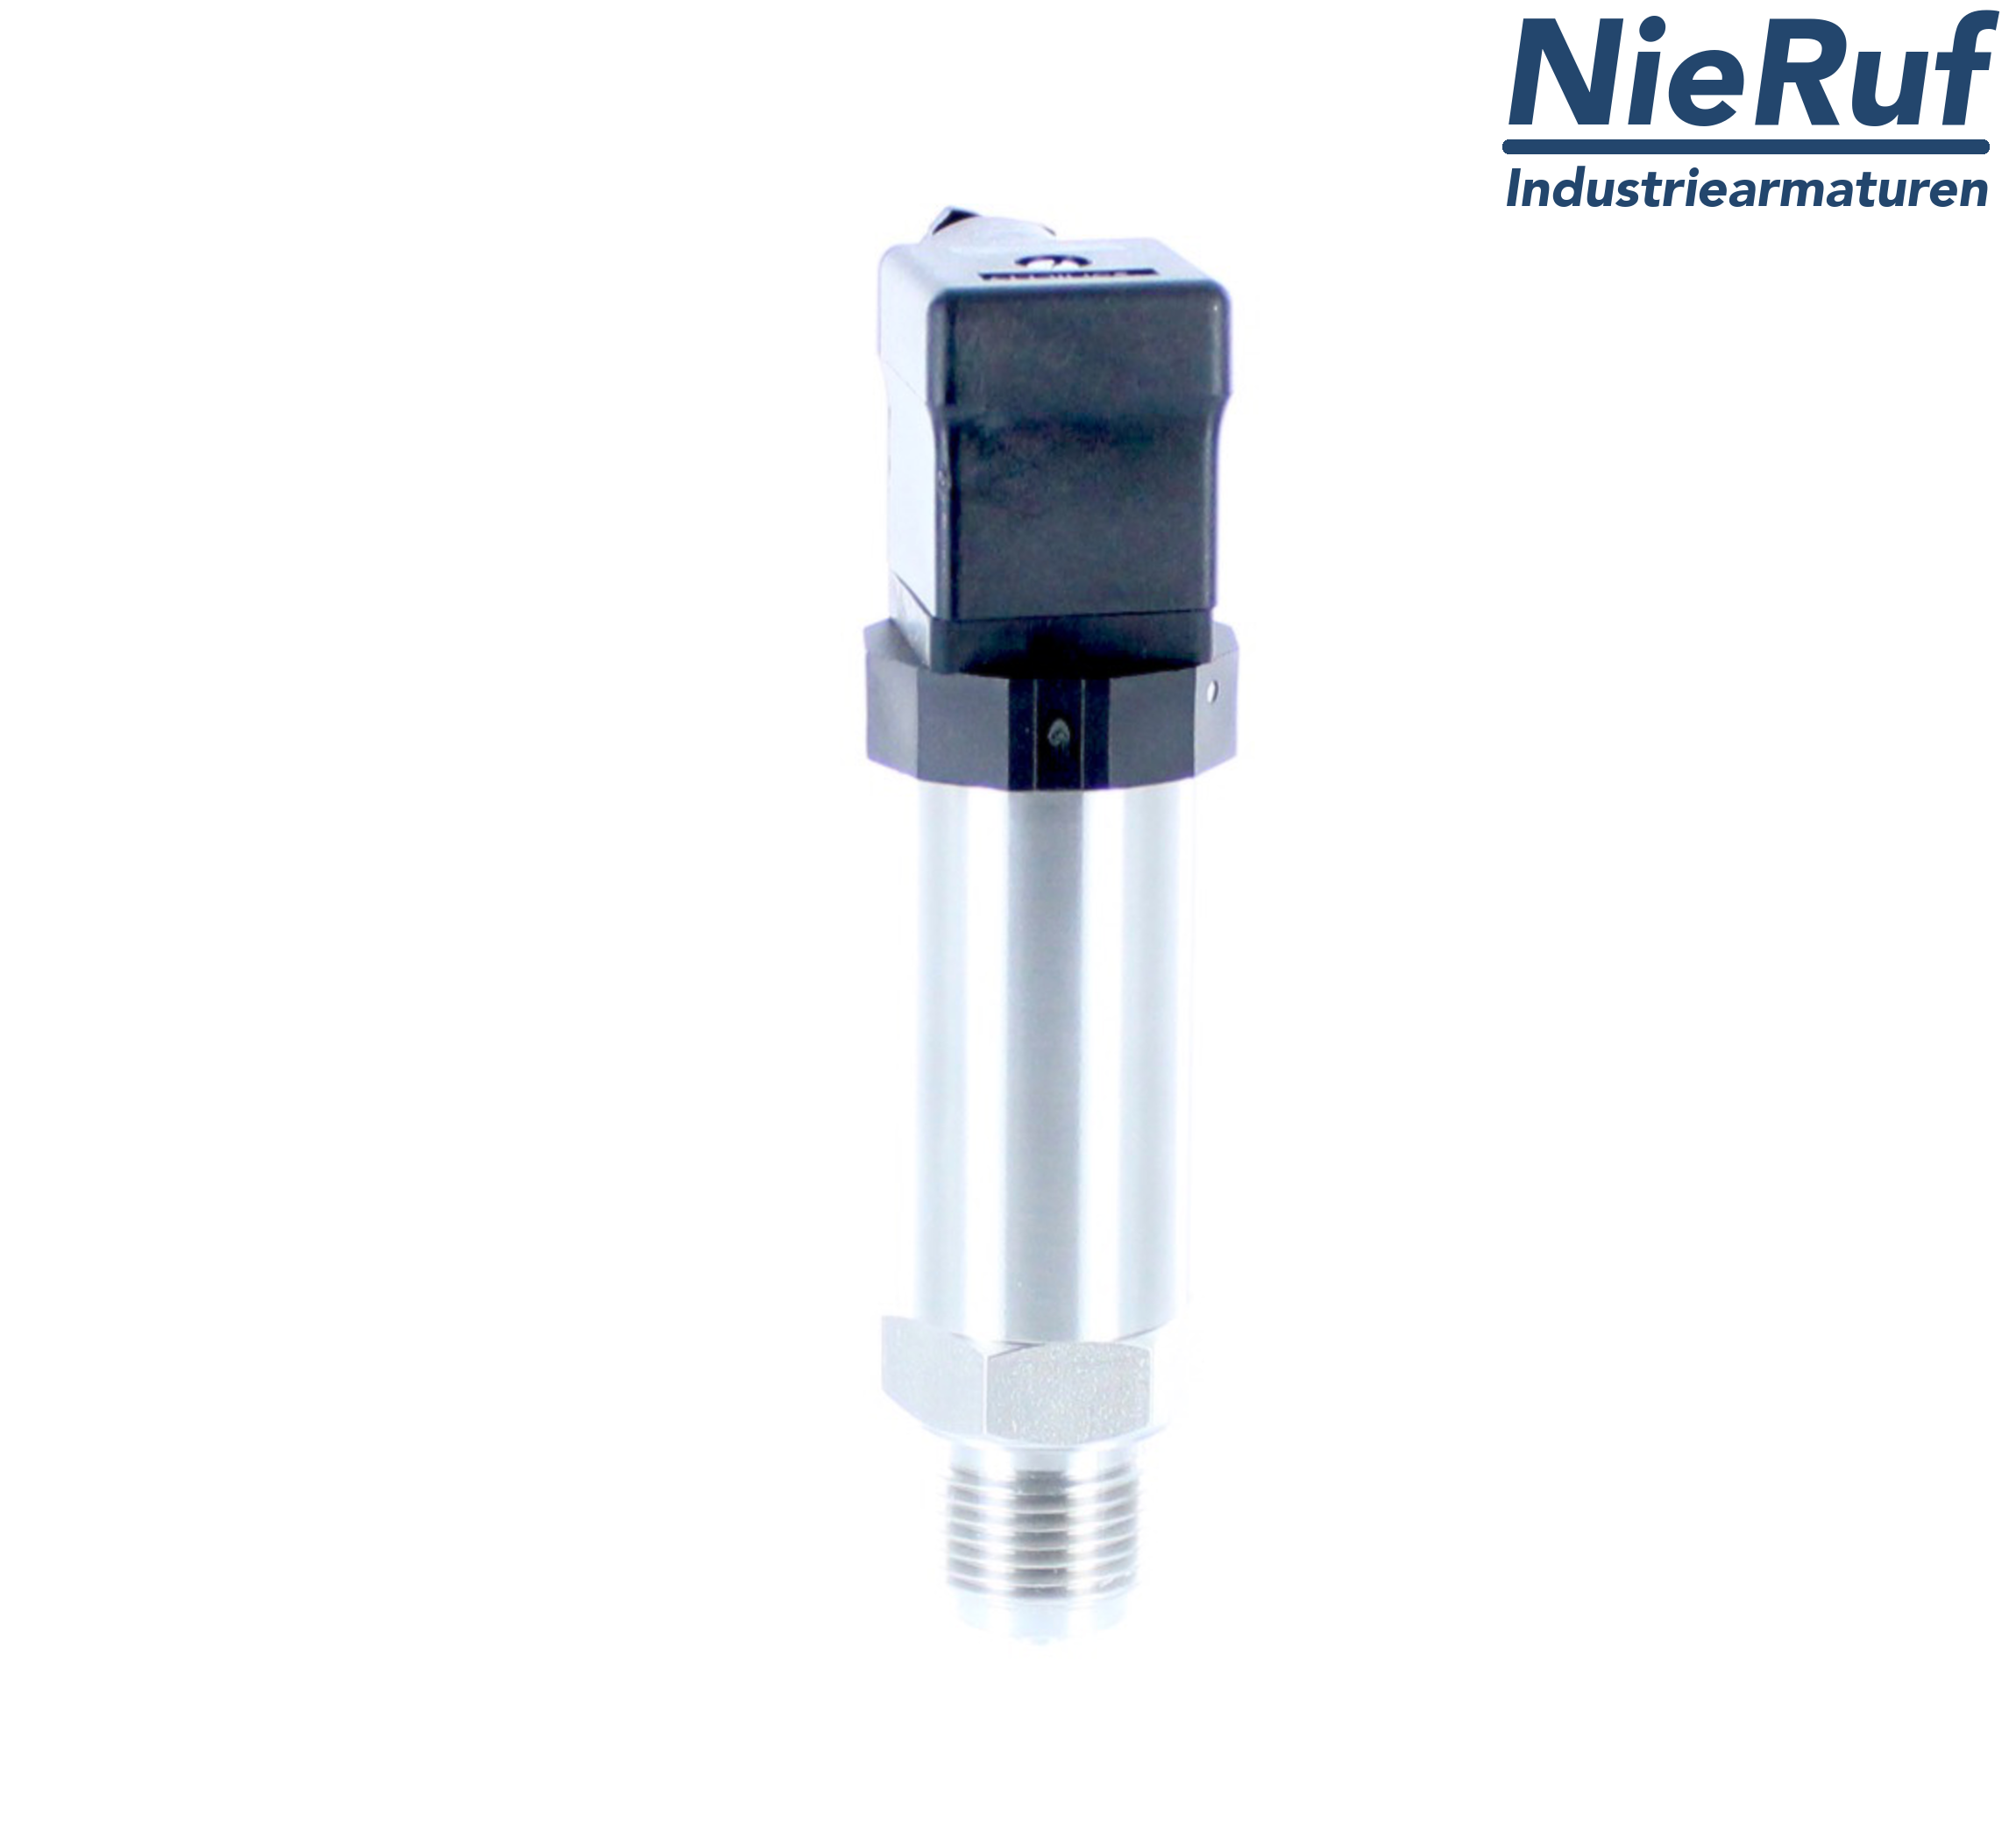 pressure sensor G 1/2" B DS01 stainless steel 2-wire: 4-20mA FPM 0,0 - 16,0 bar